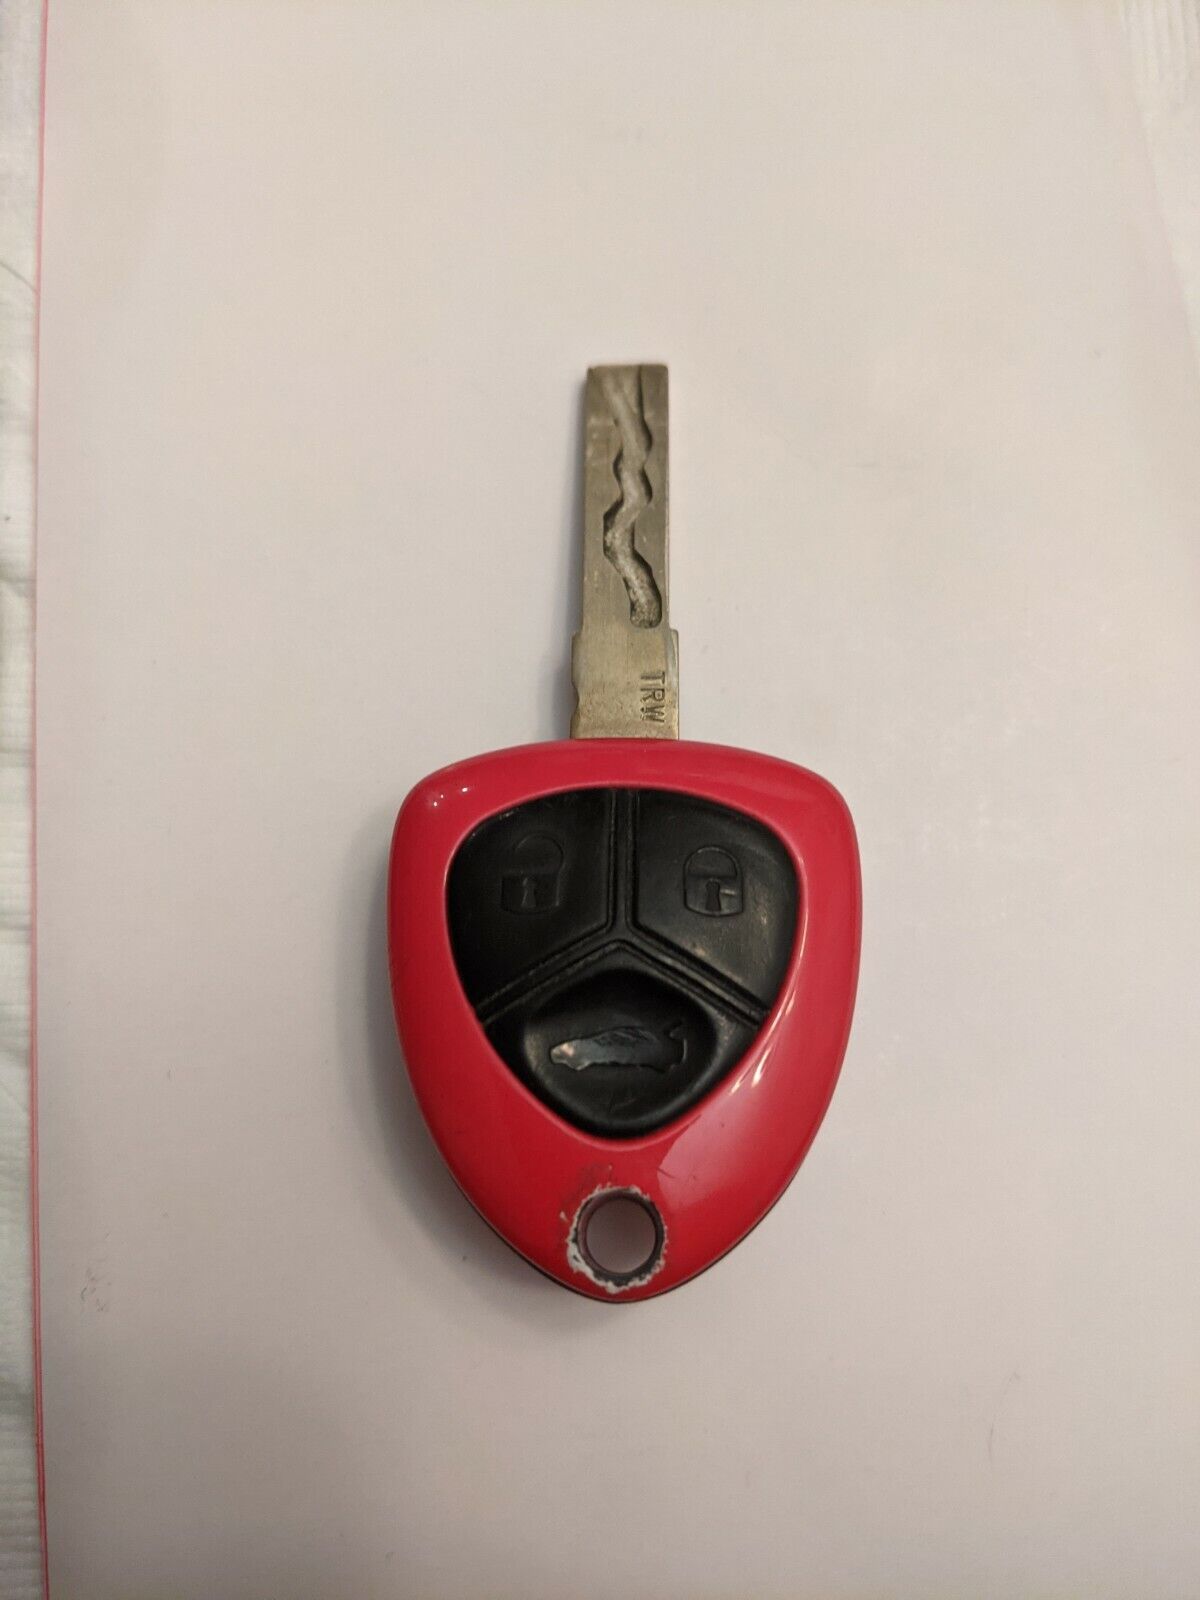 Ferrari 458 key Fob Remote Great For Collection Exotic Car